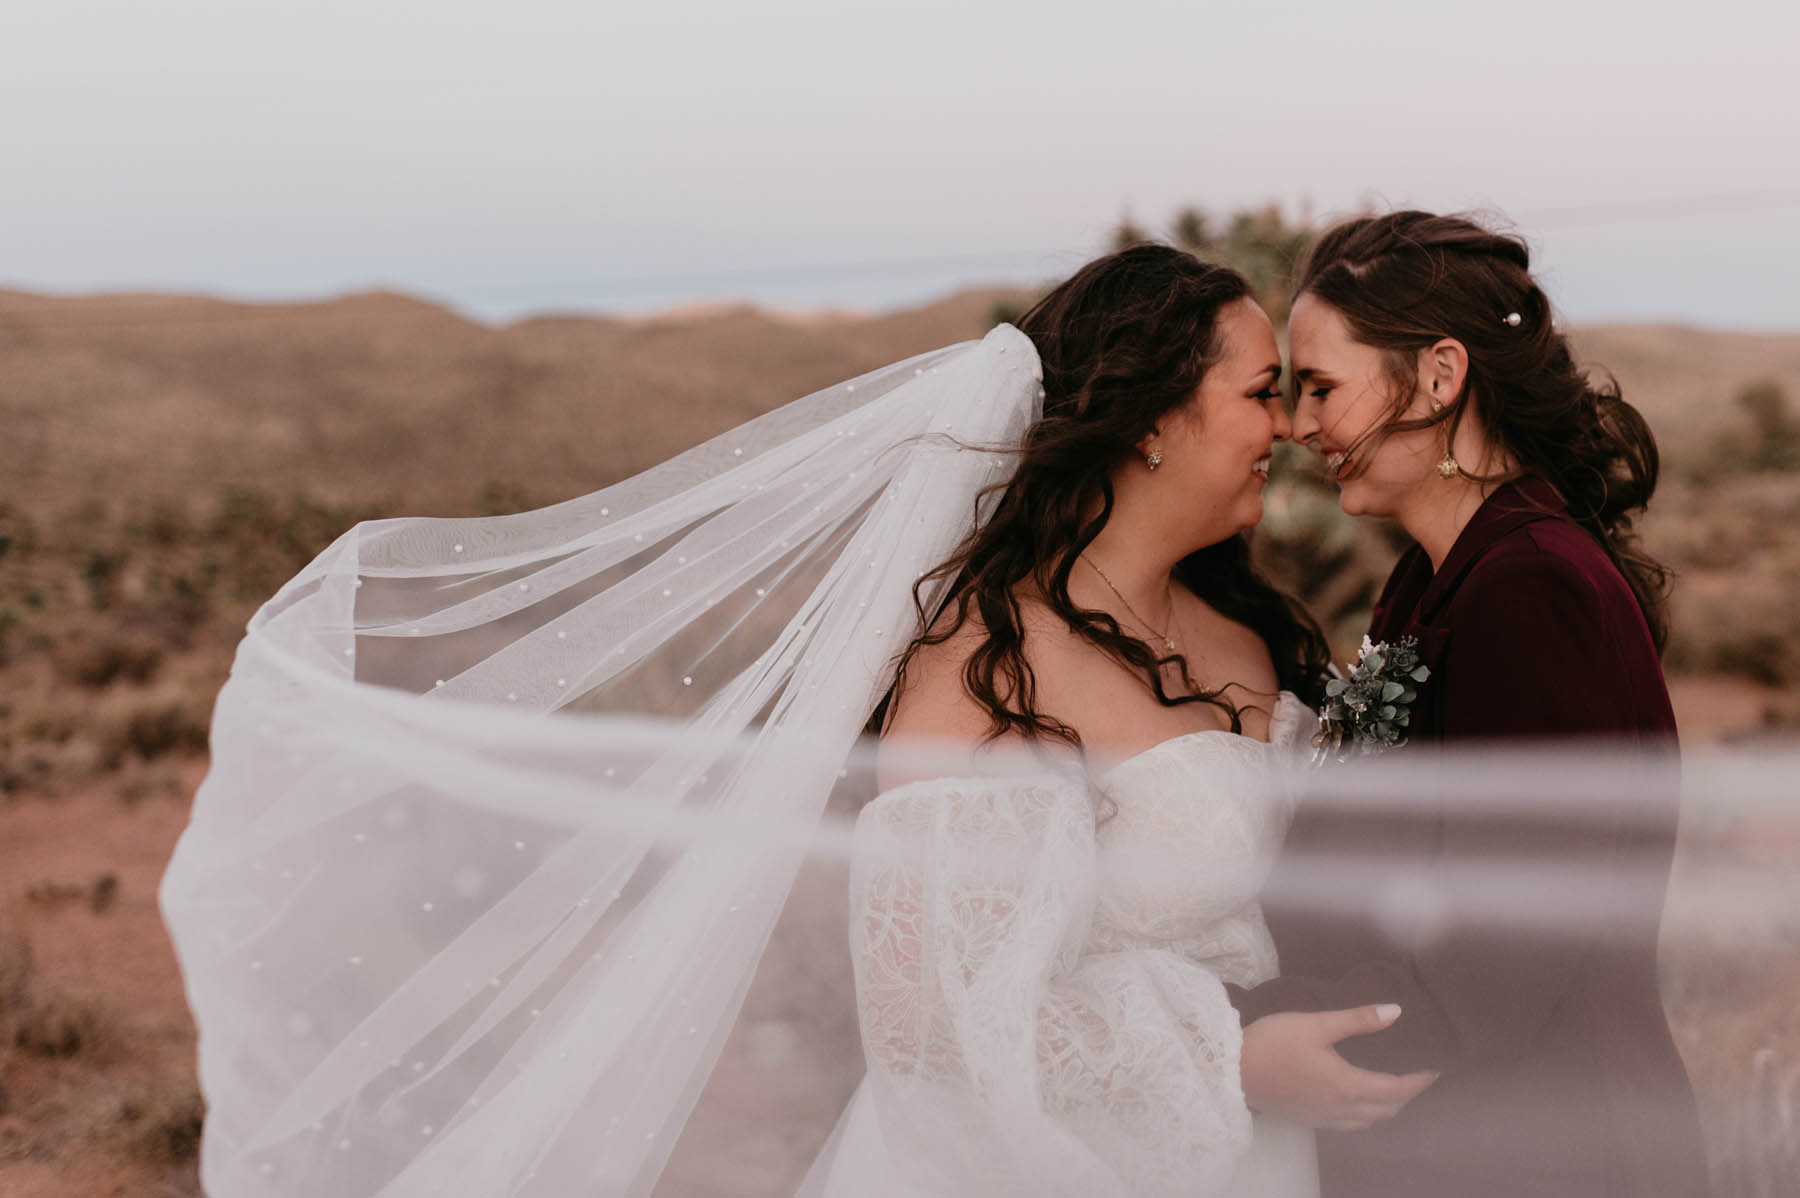 Two people with brown hair stand nose-to-nose in a desert, with a white veil draped in front of them.